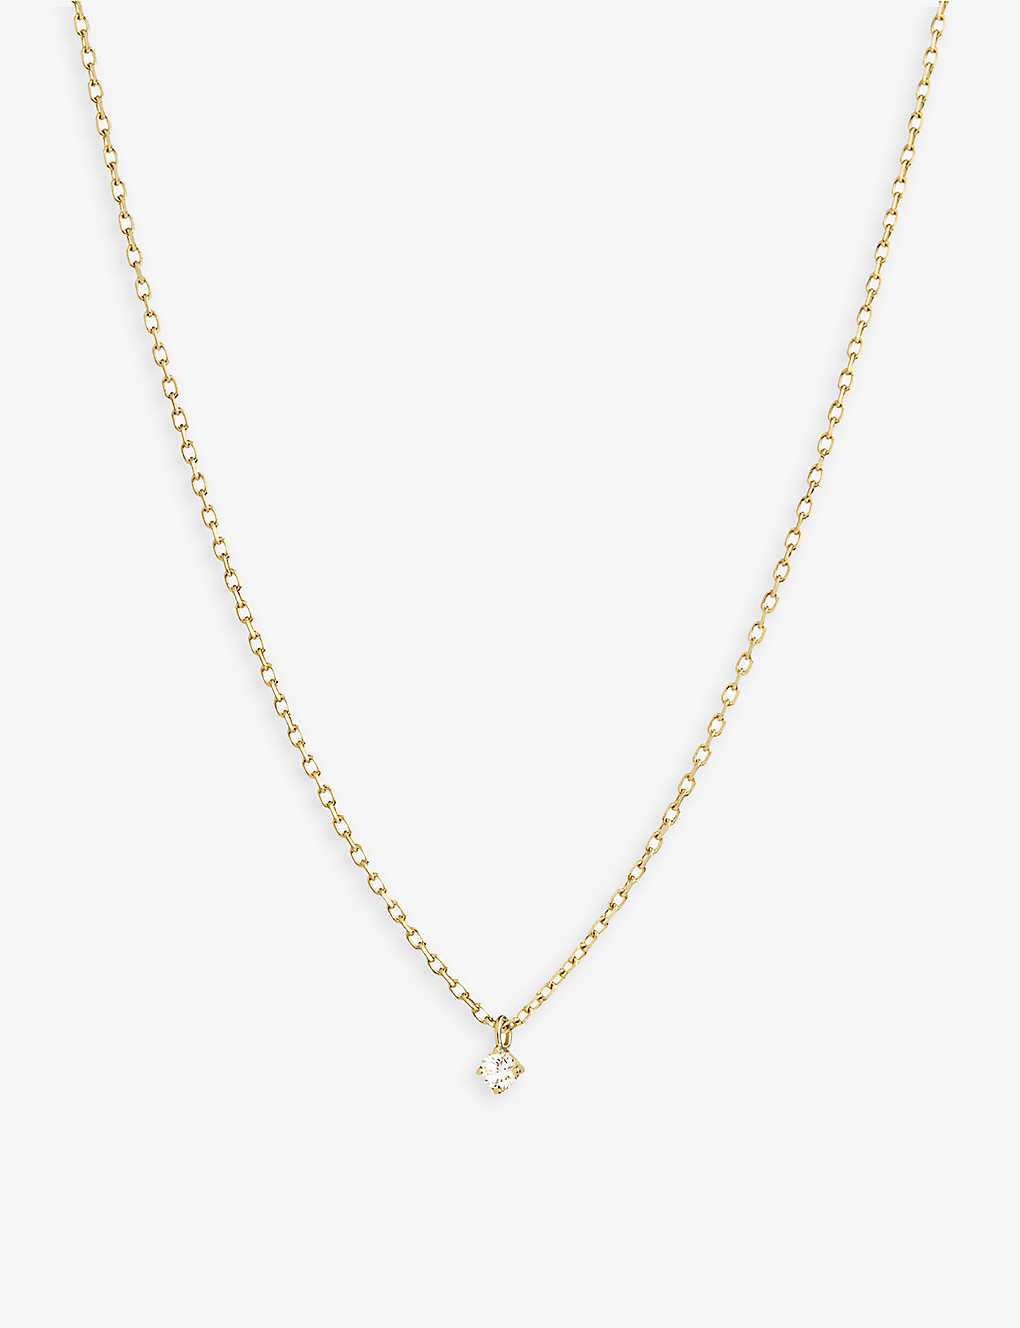 The Alkemistry Ruifier Scintilla Polaris 18ct Yellow Gold And 0.04ct Diamond Necklace